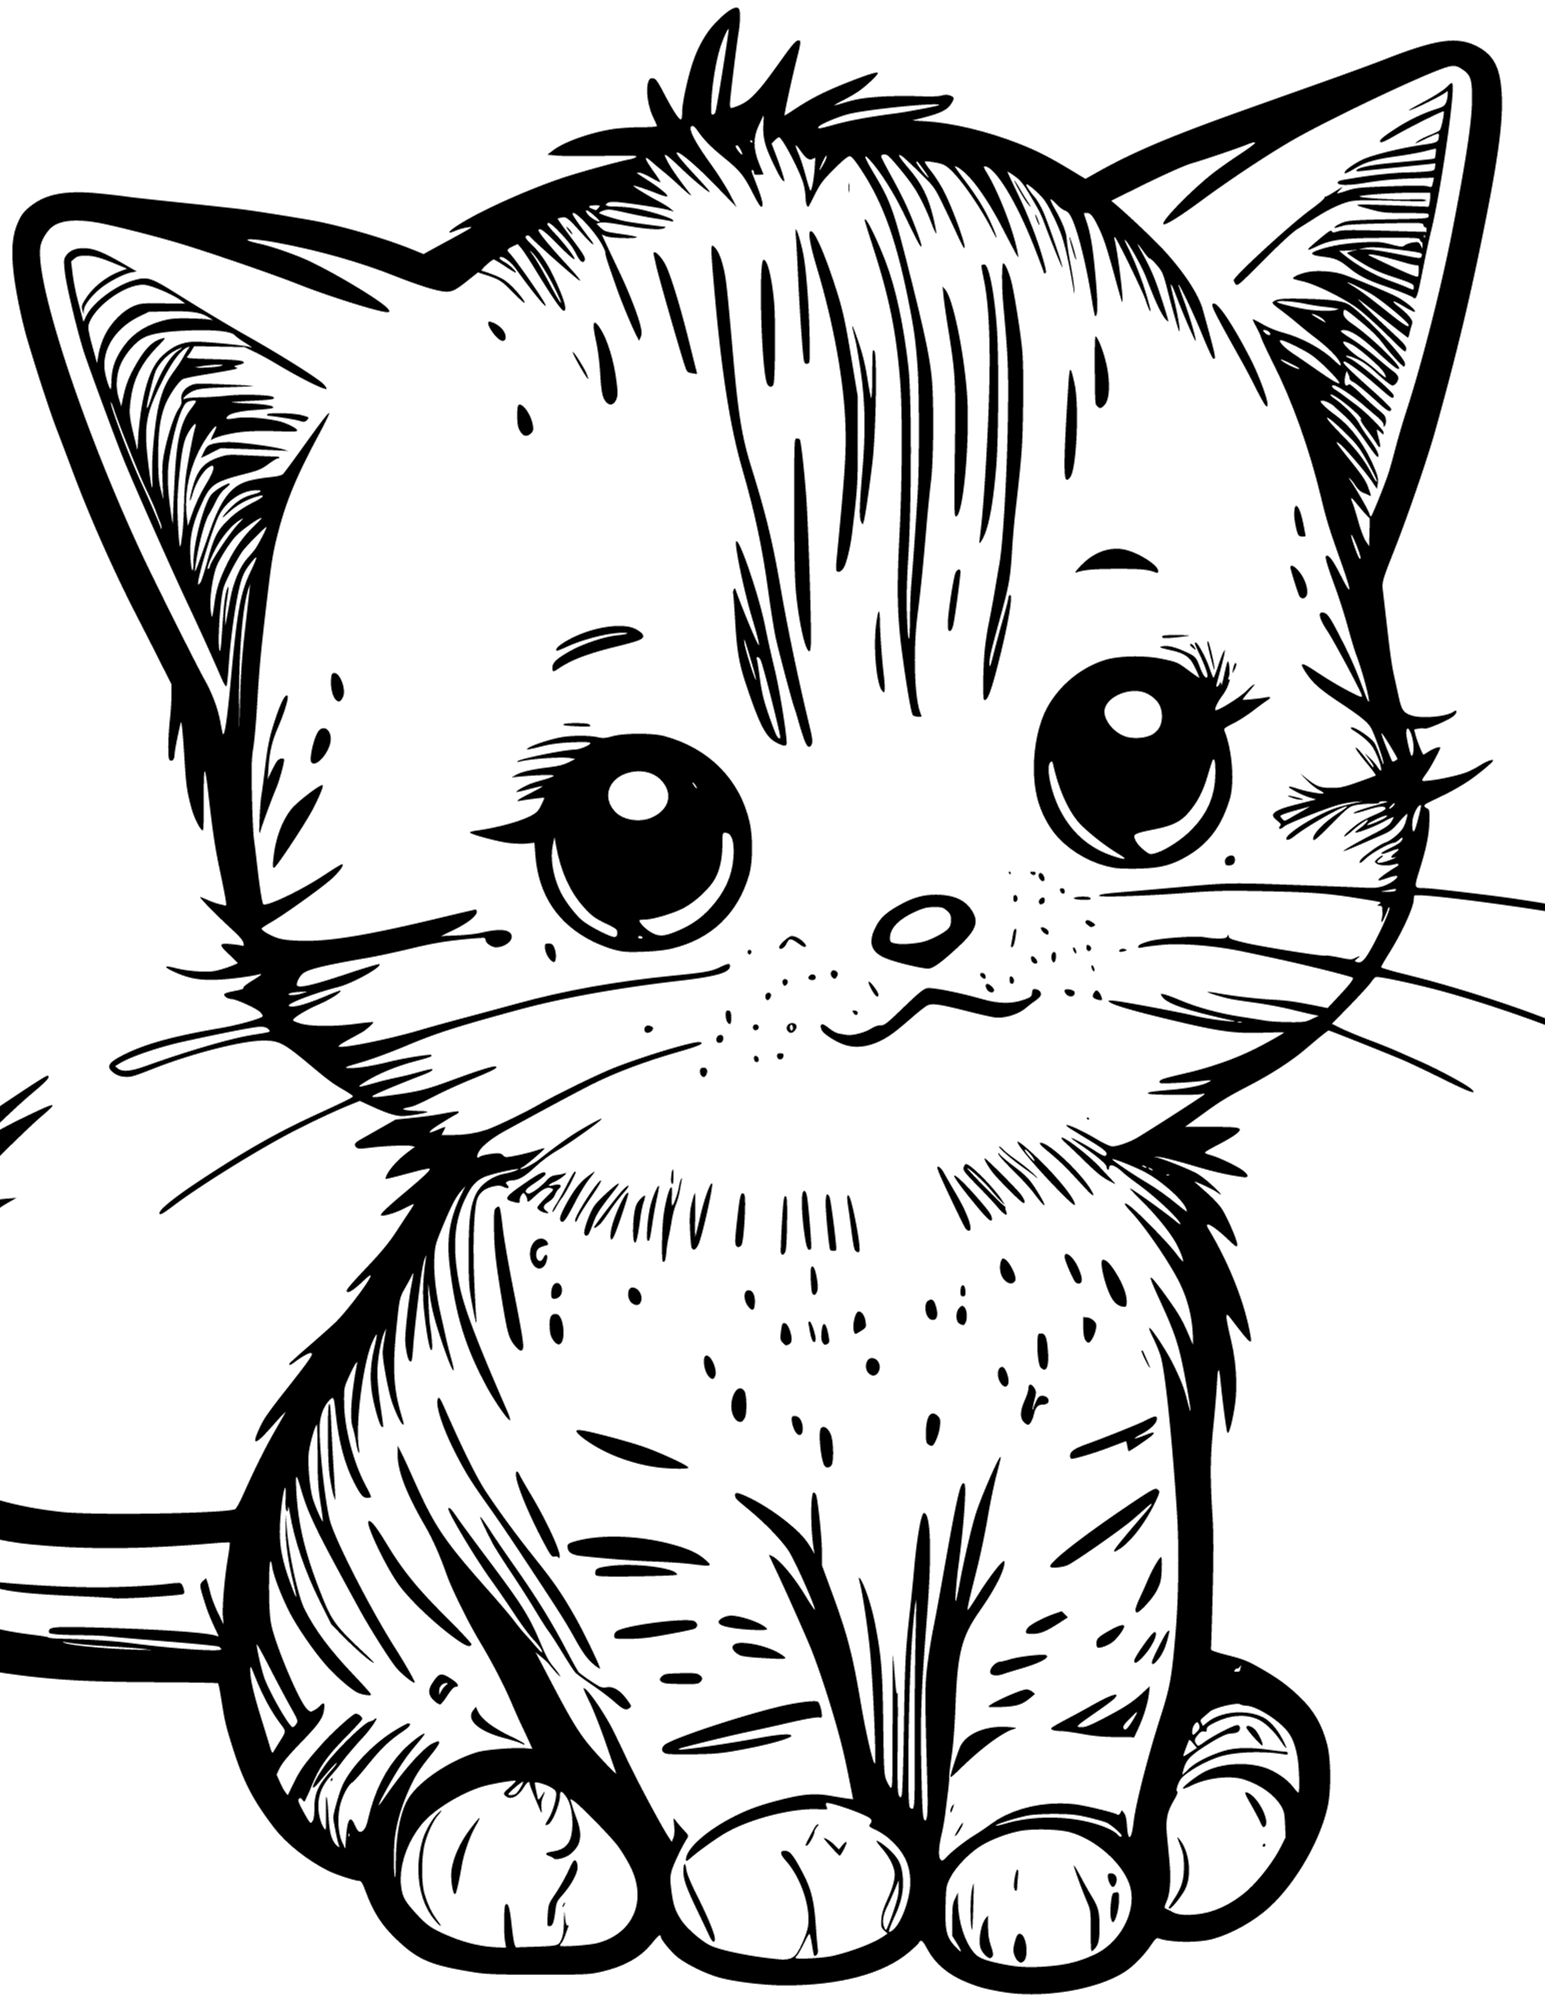 Cute kitten coloring pages for kids and adults